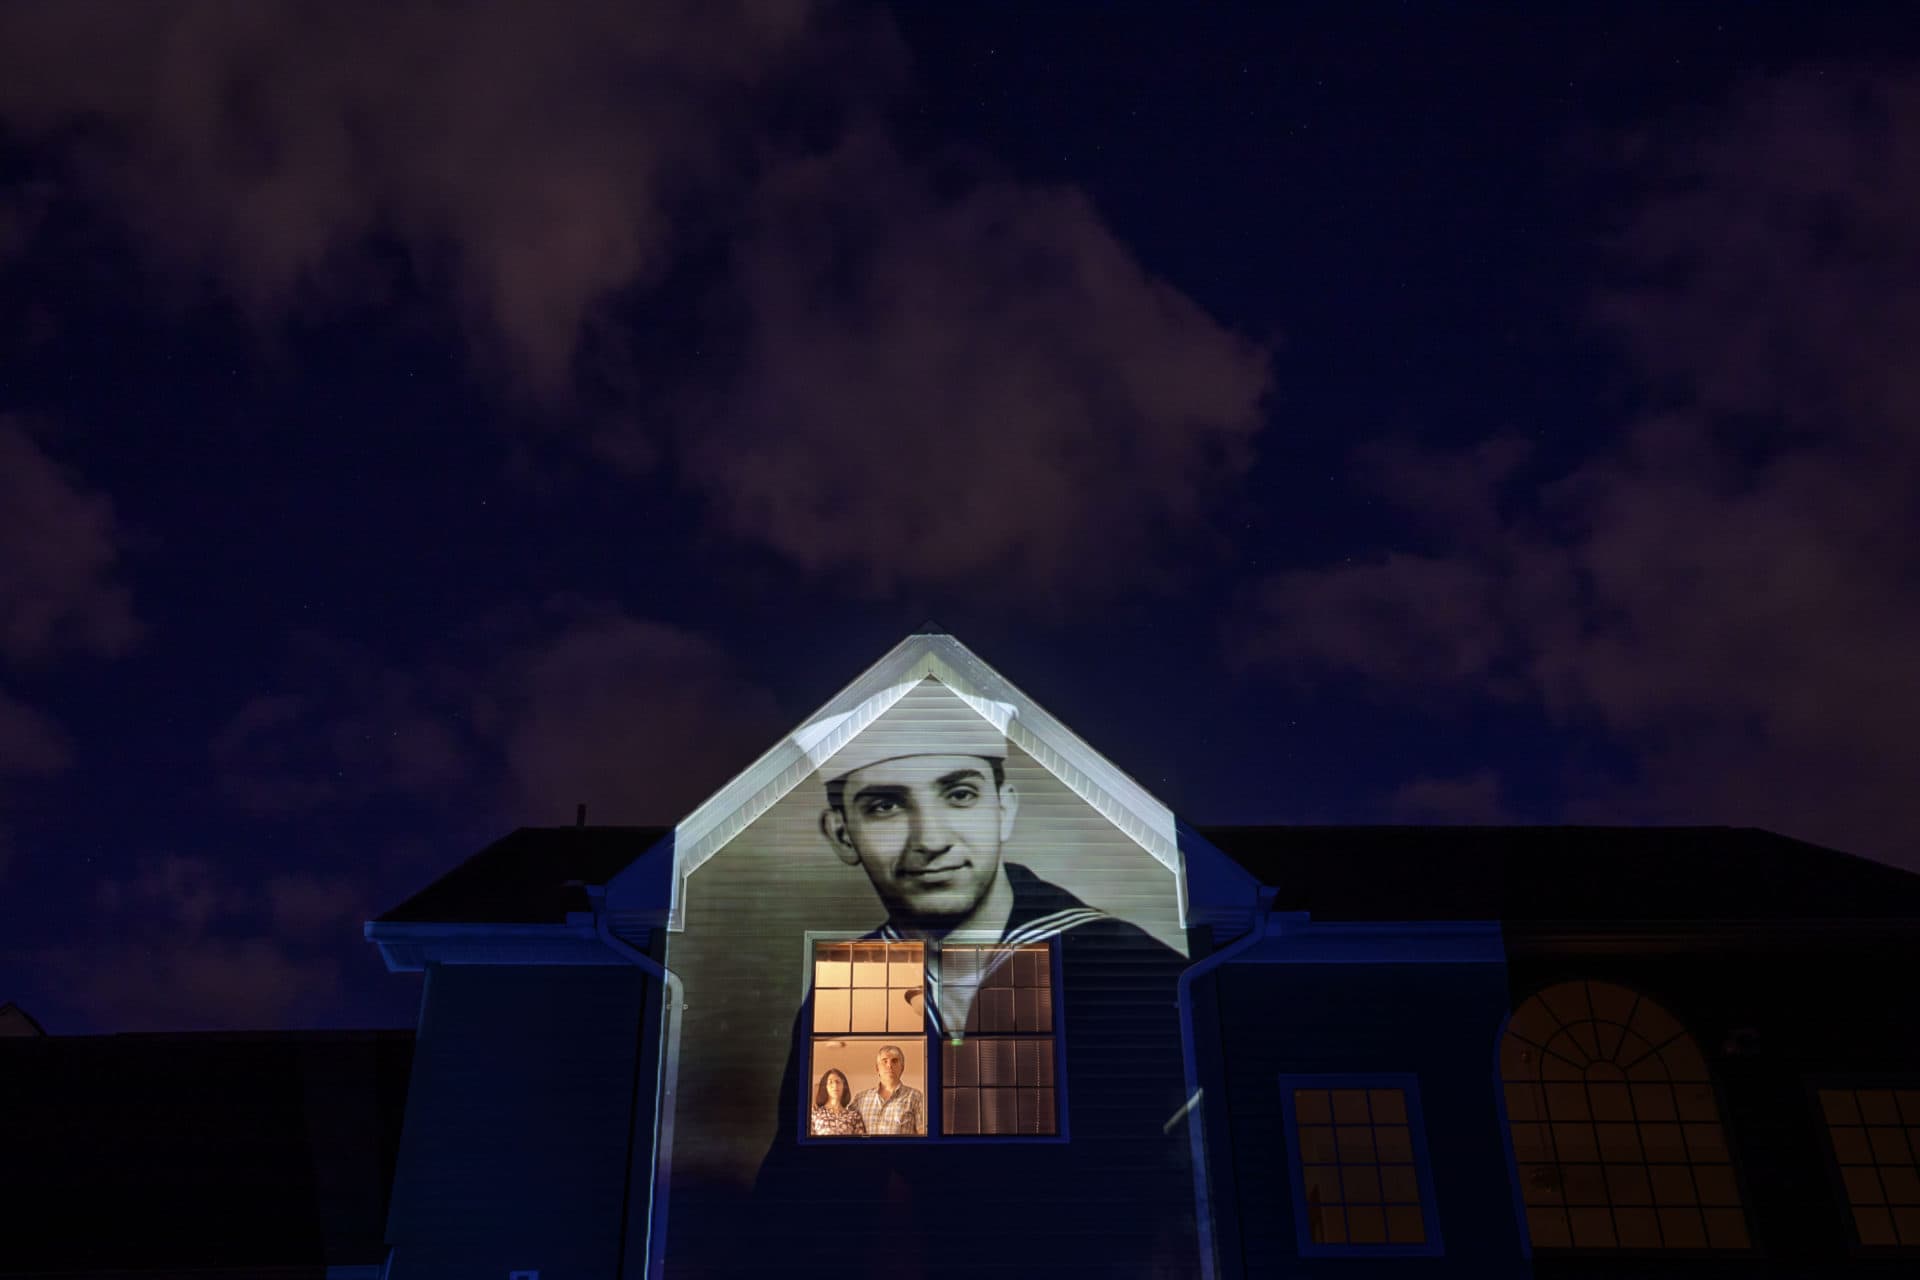 An image of veteran Harry Malandrinos is projected onto the home of his son, Paul Malandrinos, as he looks out a window with his wife, Cheryl, in Wilbraham, Mass. (David Goldman/AP)